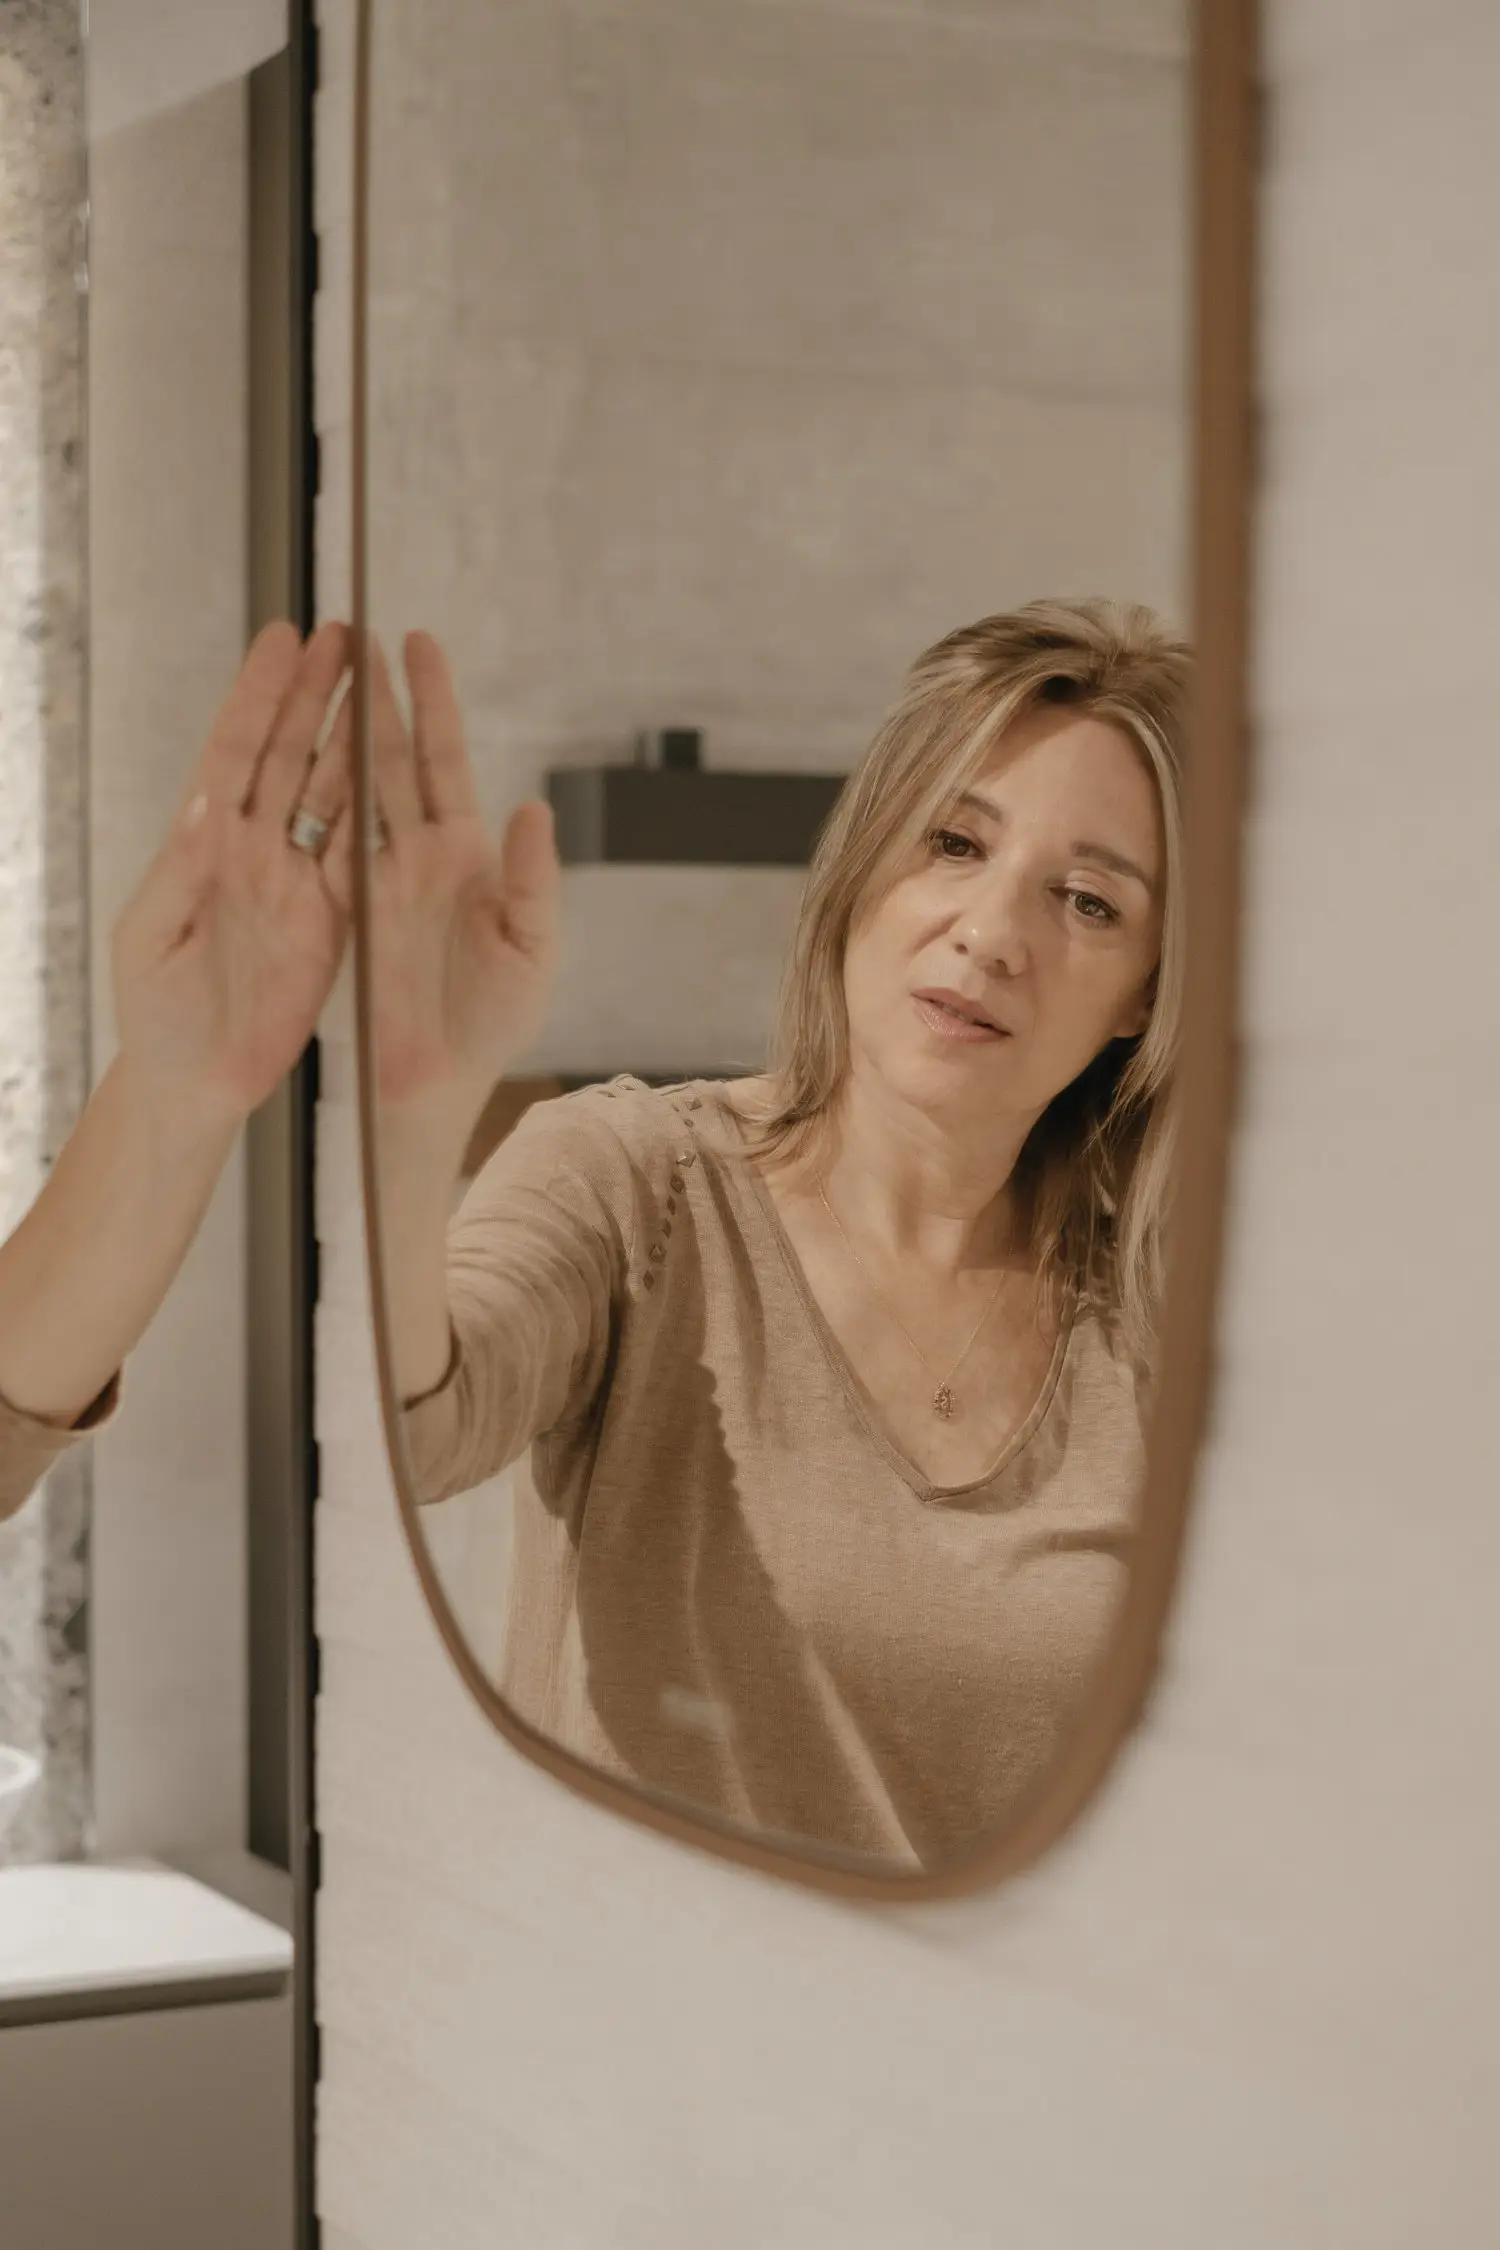 A wall mirror reflects the image of Stefania Luraghi, founder of studio Elles Interior Design.